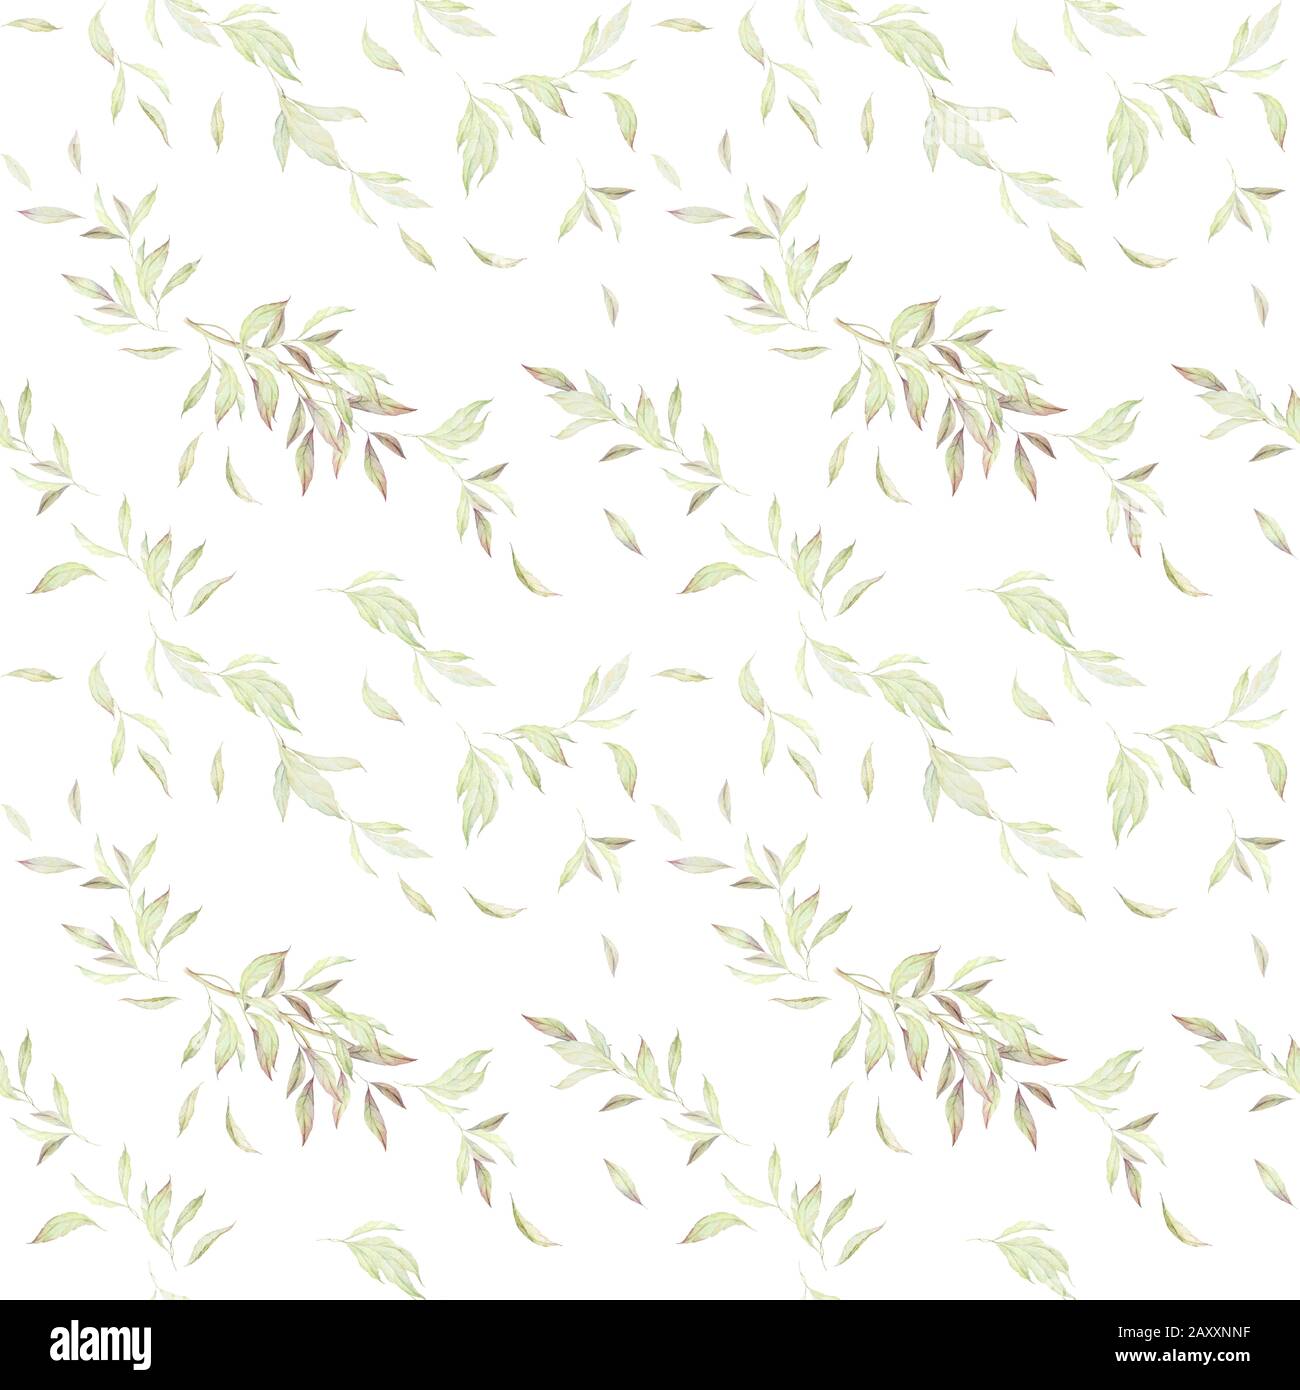 Seamless Floral Pattern. Lush Leaves. Watercolor Vintage. Wallpaper for walls. White color background. Stock Photo